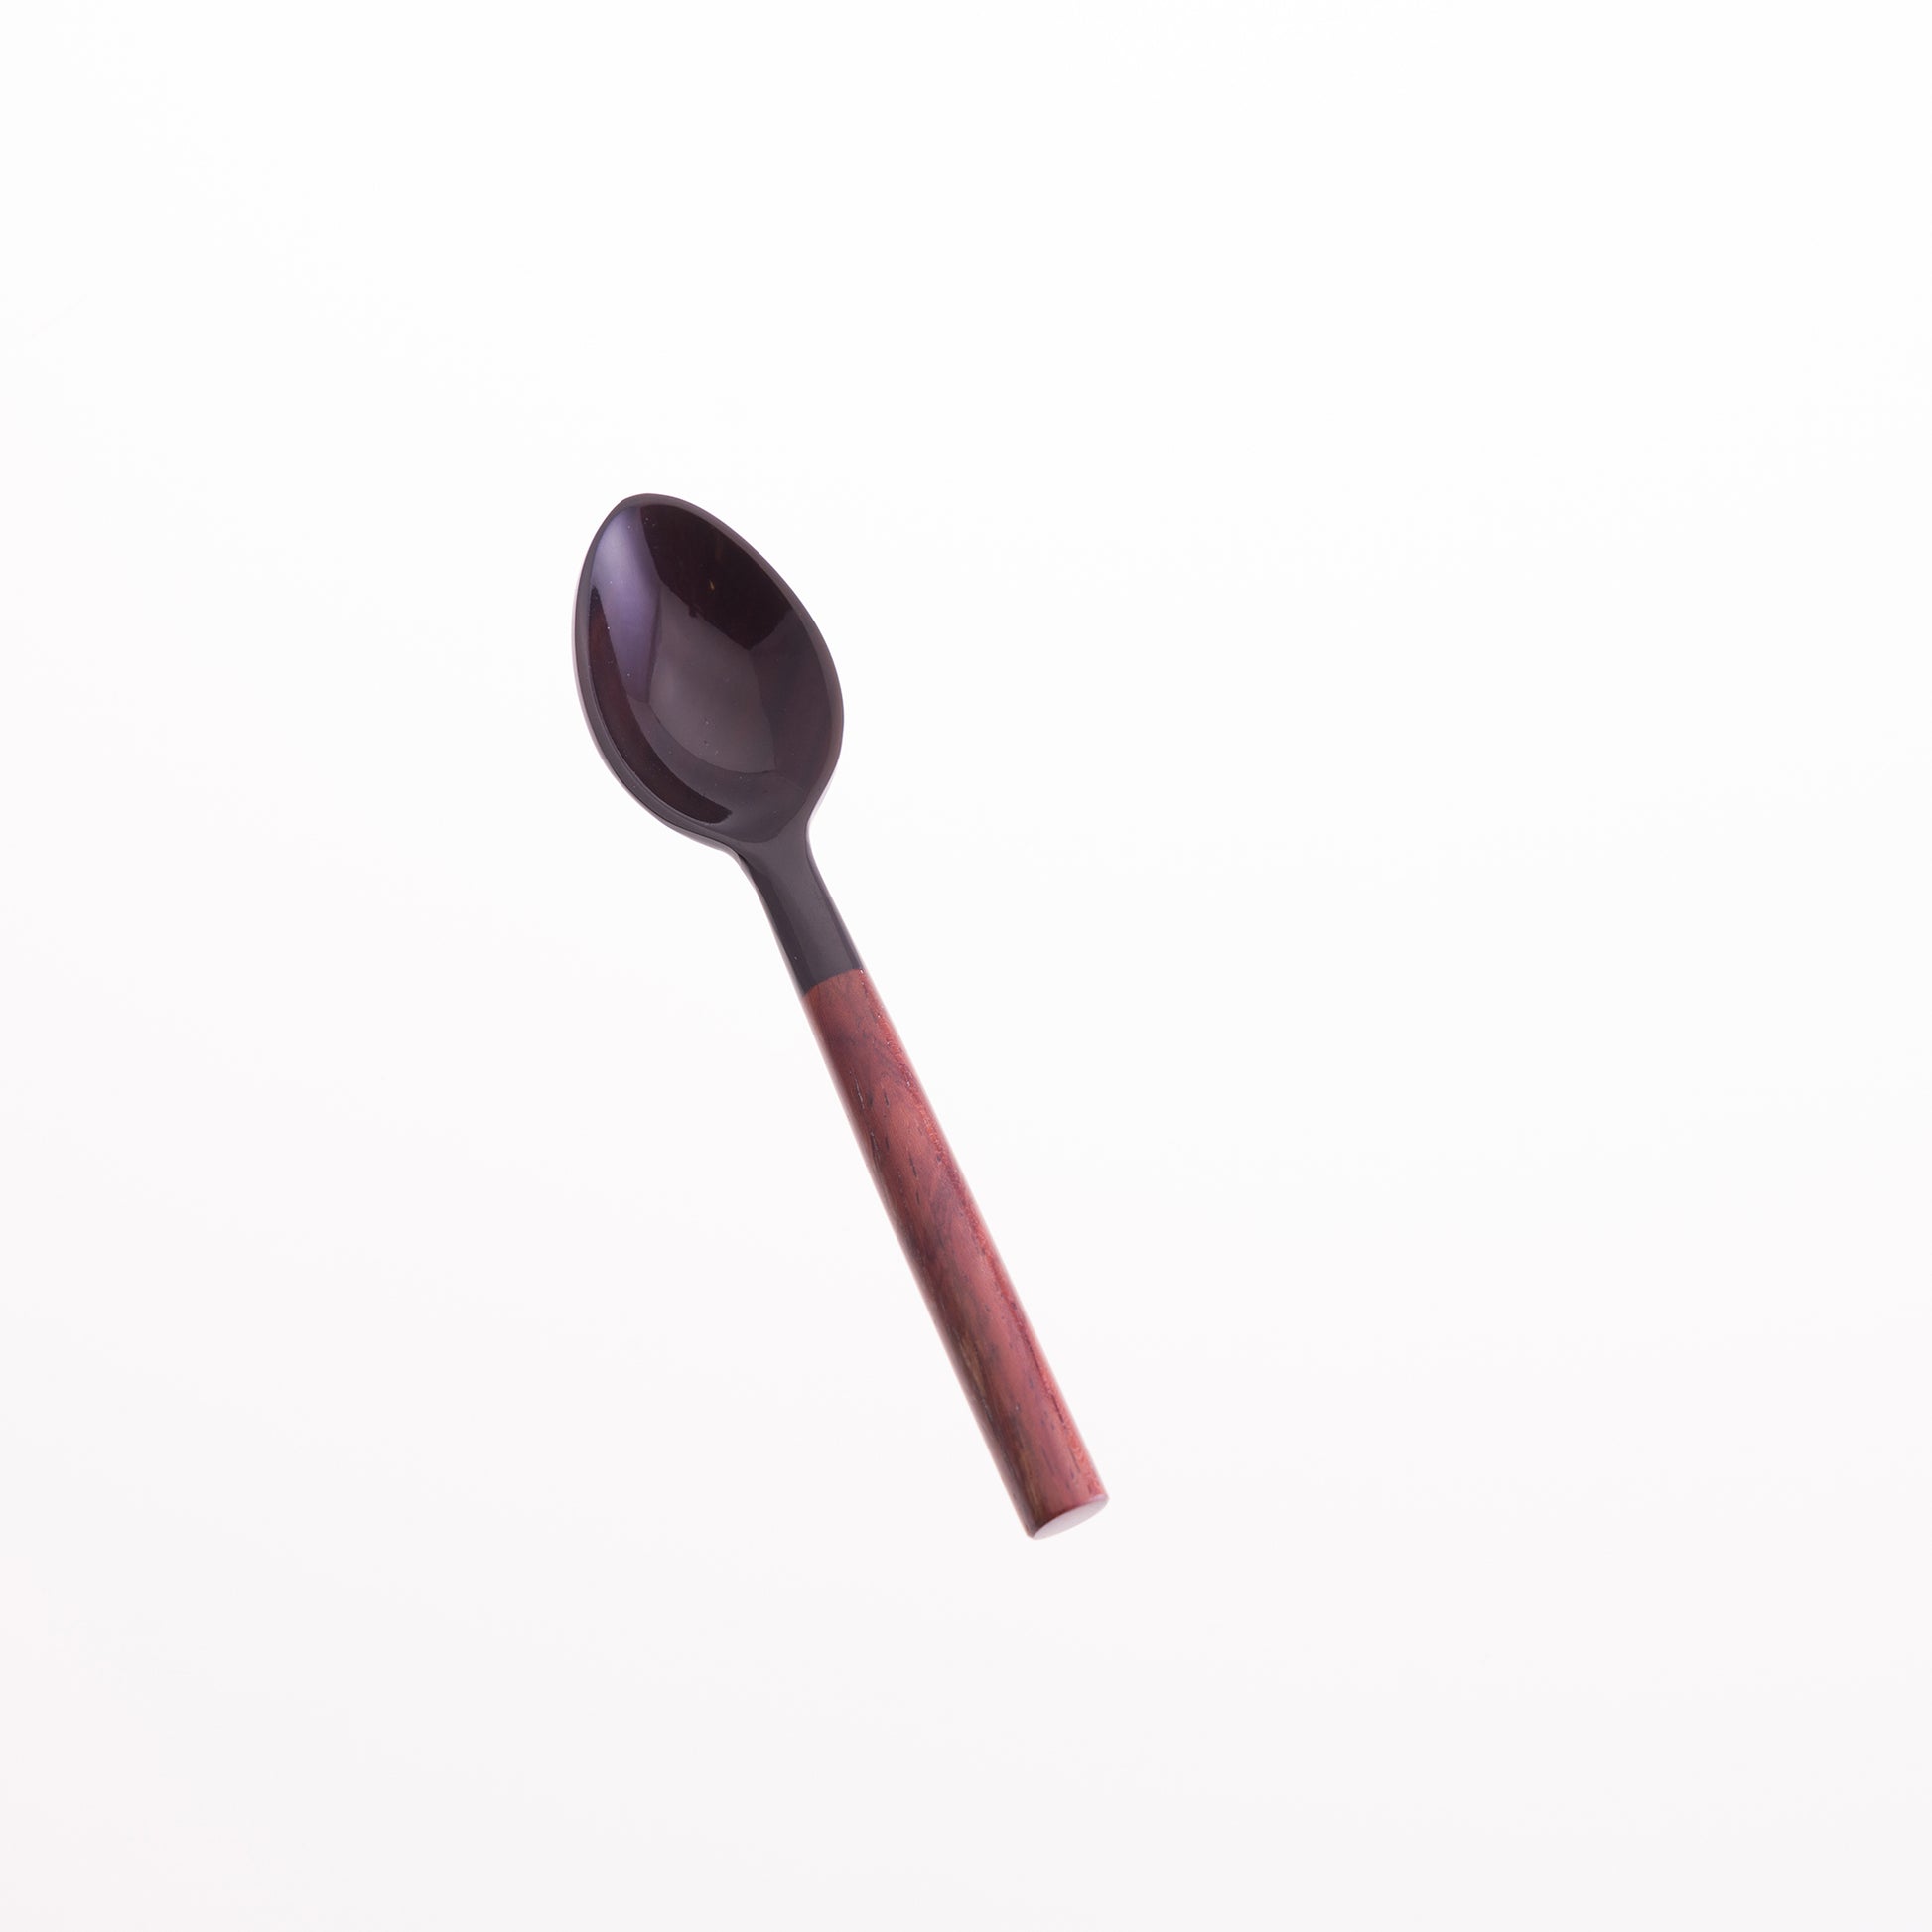 A horn egg spoon, black horn with a rosewood handle